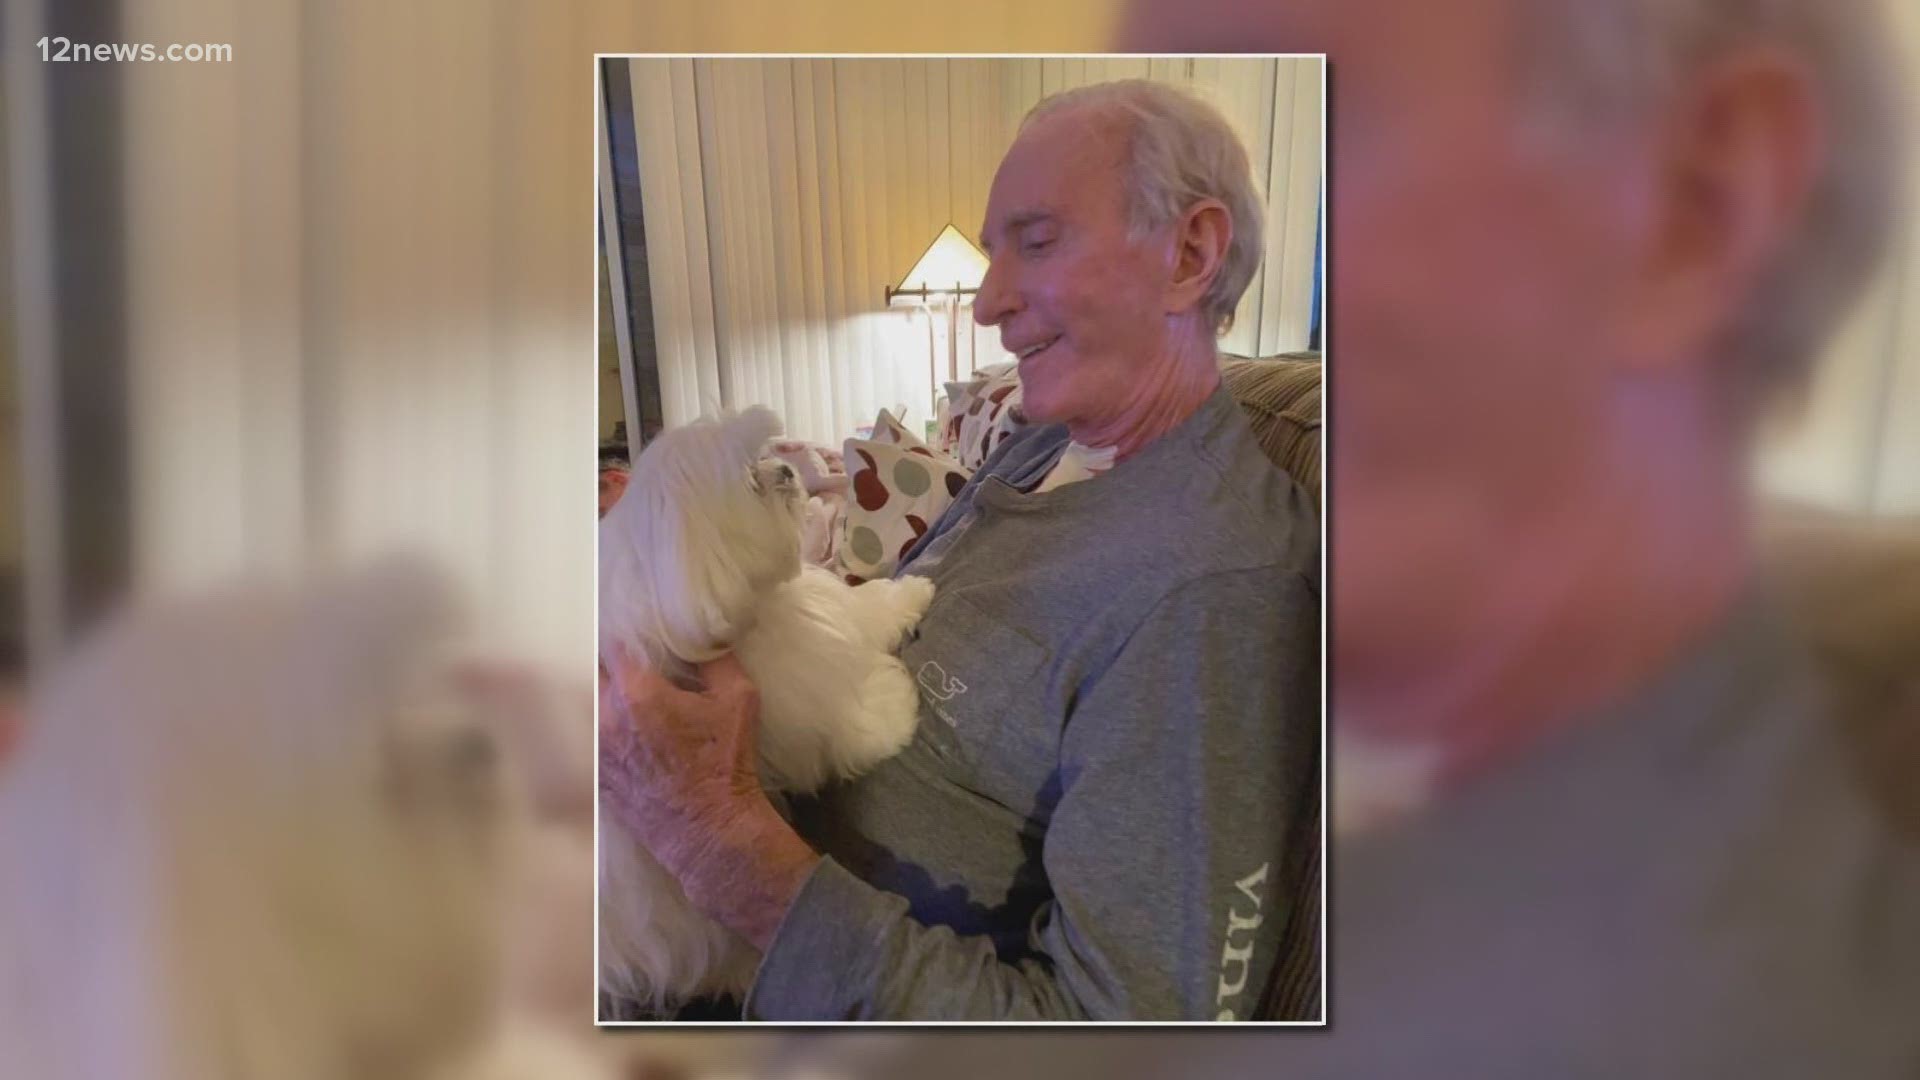 A Scottsdale man who survived a long, hard battle with COVID-19 says he was saved by prayers and his dogs. The dogs were by his side when no one else could be.